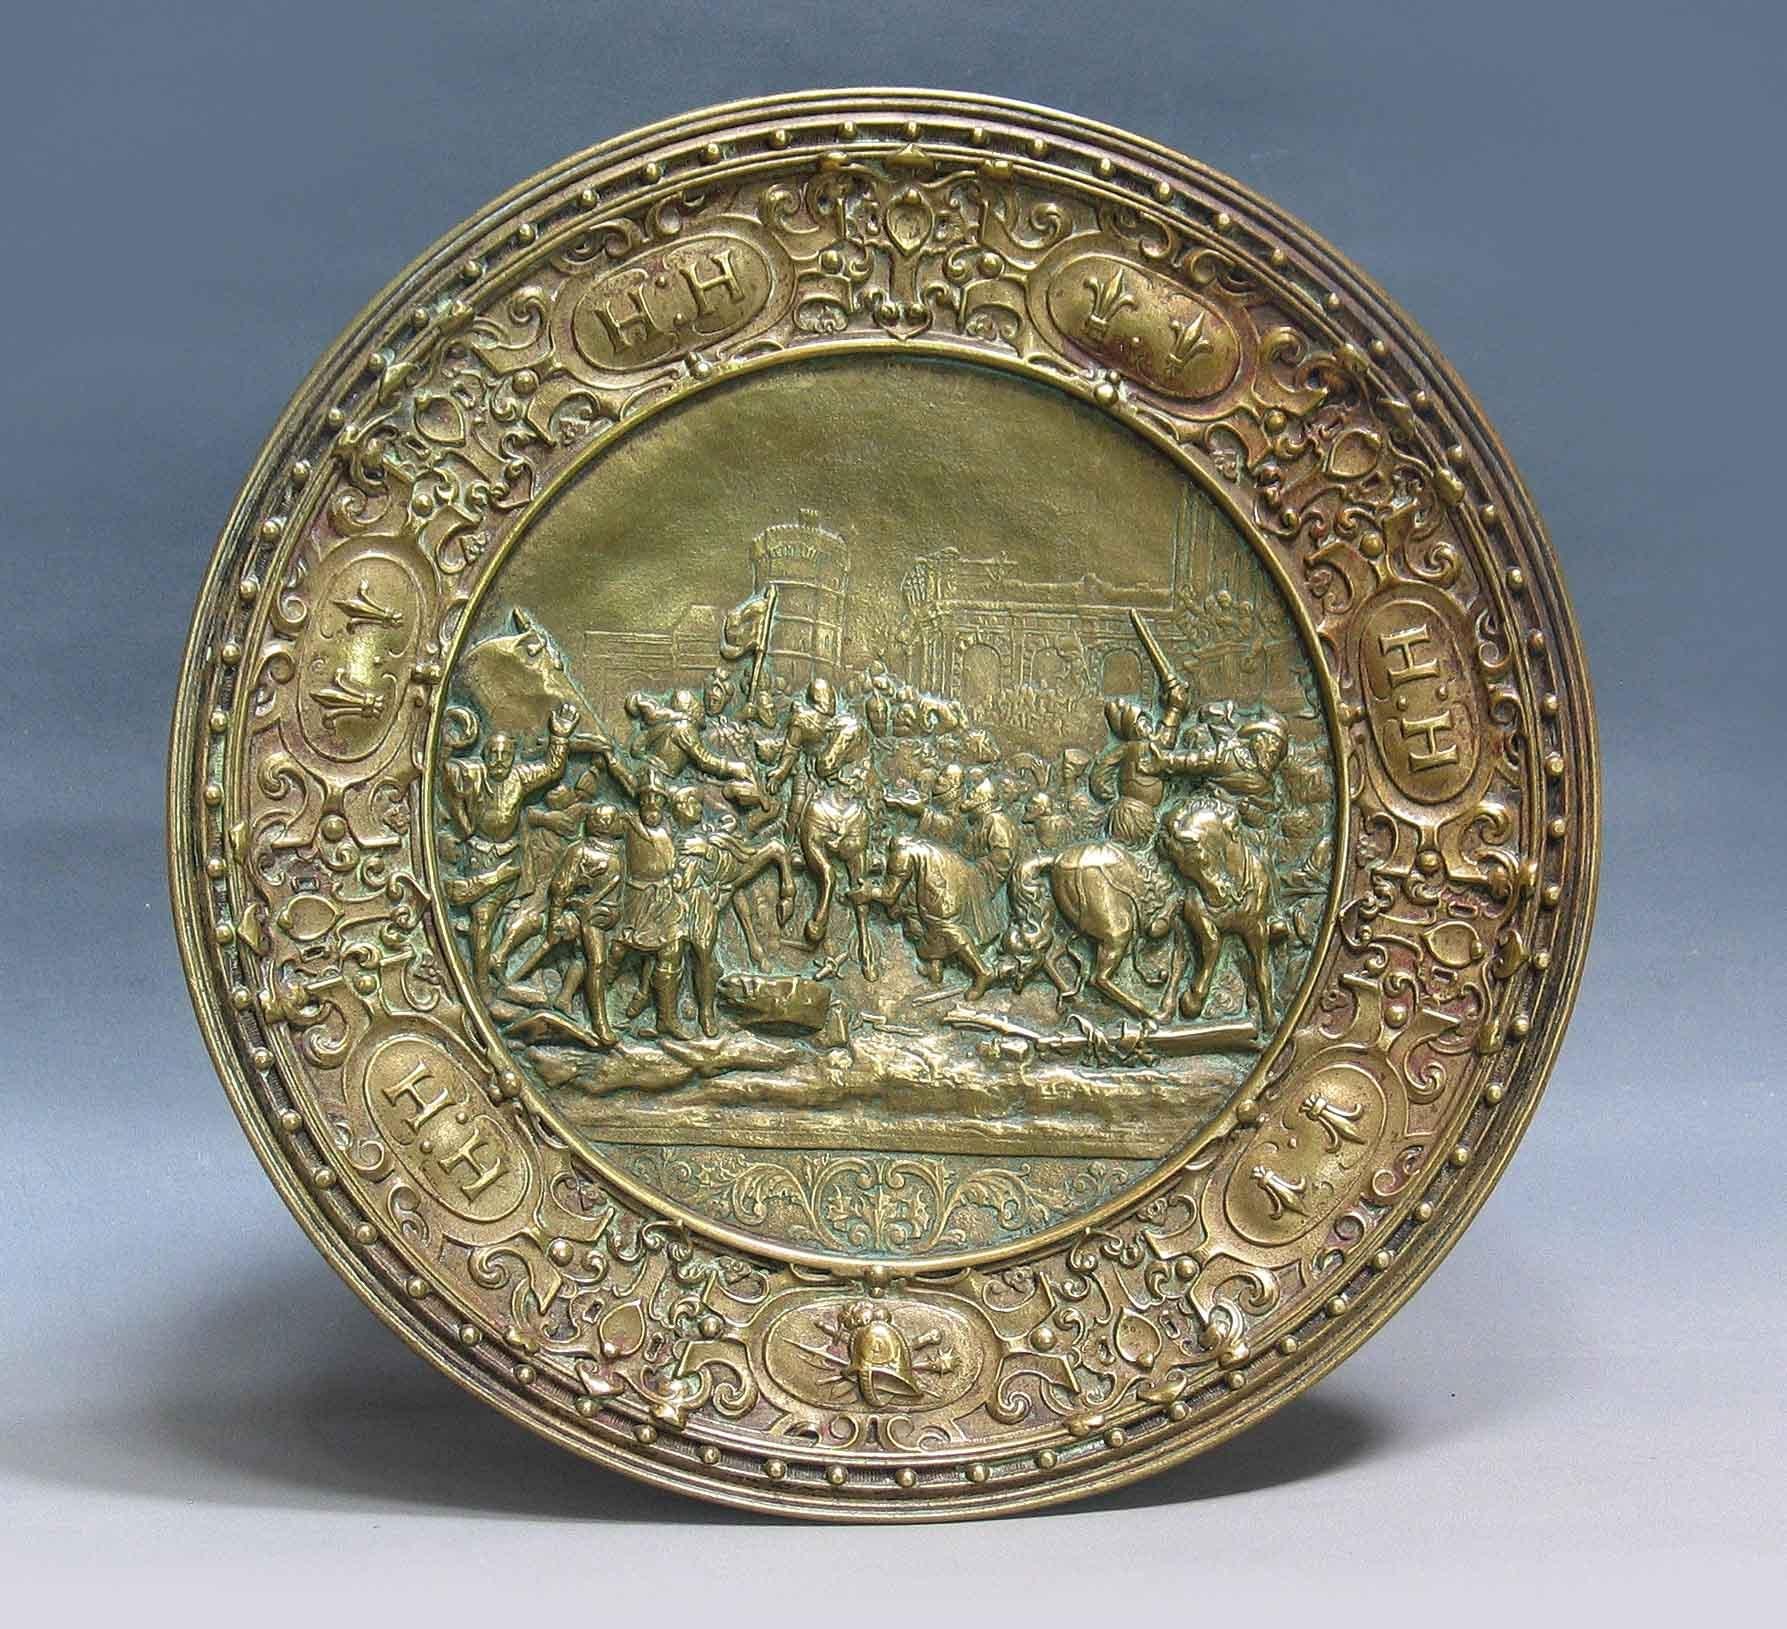 German Bronze Historicism Charger Depicting Entry of Henry IV into Paris in 1594 For Sale 4